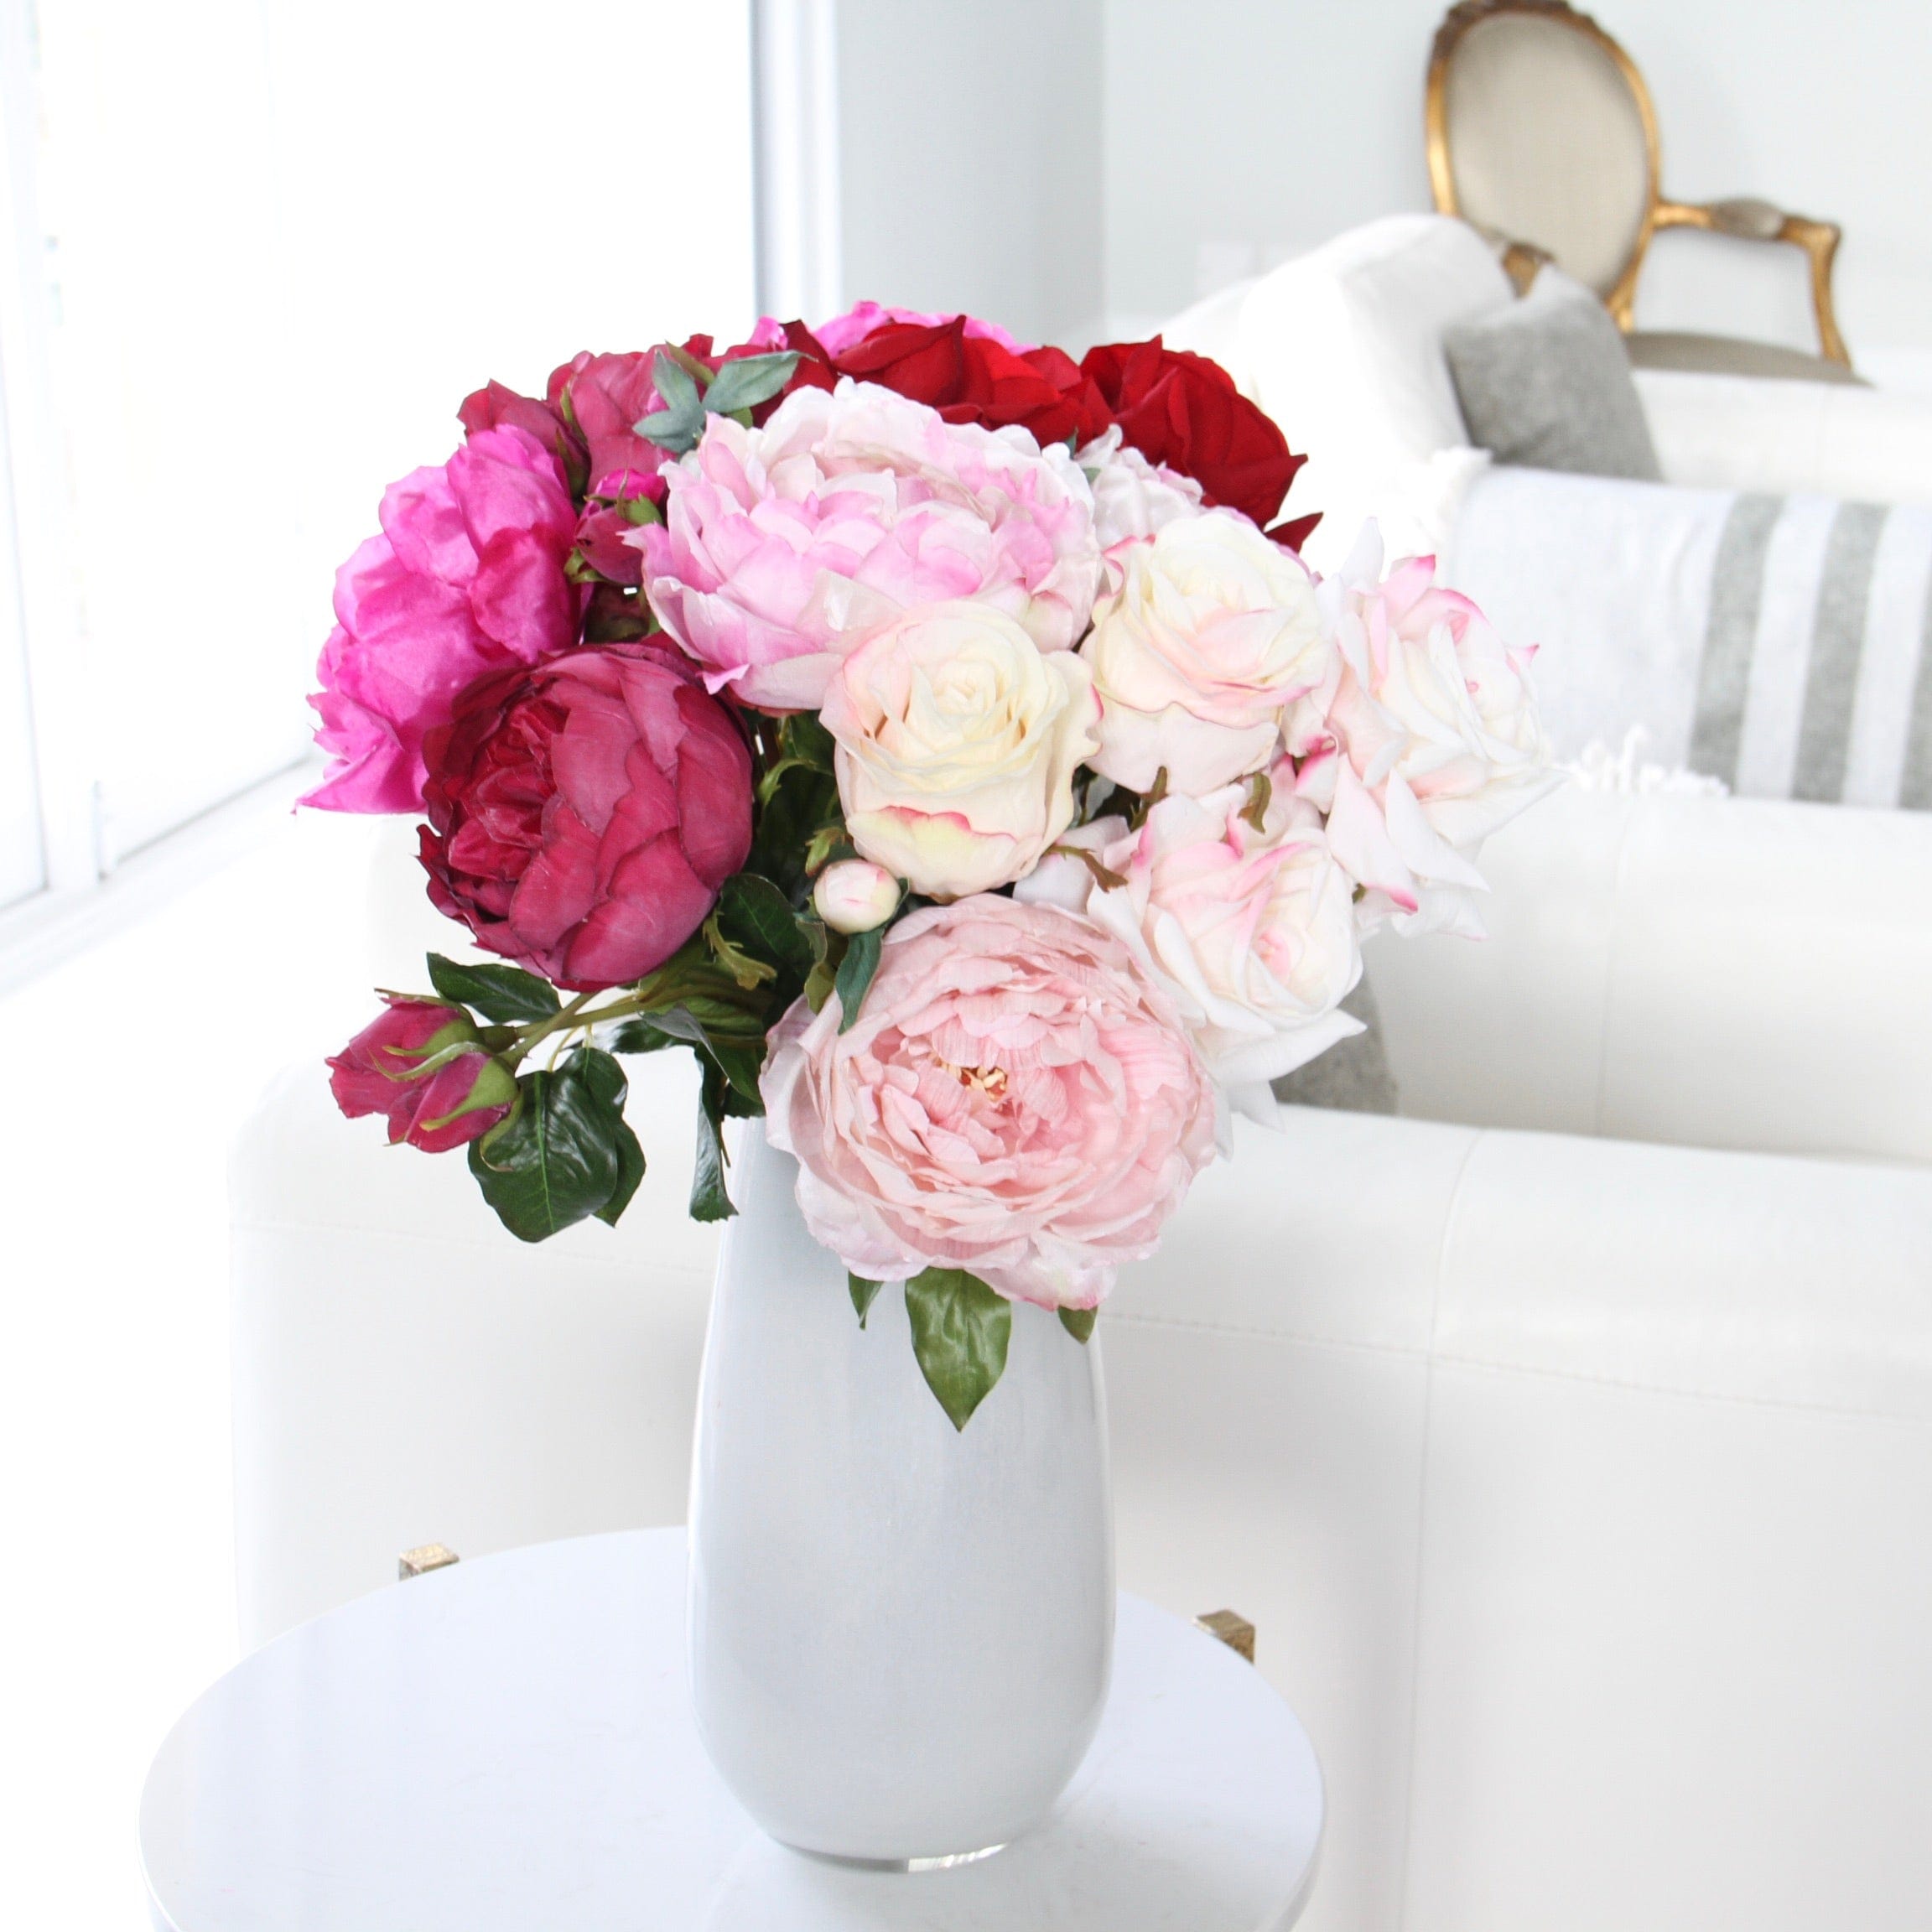 Artificial flowers luxury faux pink red roses and peonies lifelike realistic faux flowers buy online from Amaranthine Blooms UK shades of love bouquet